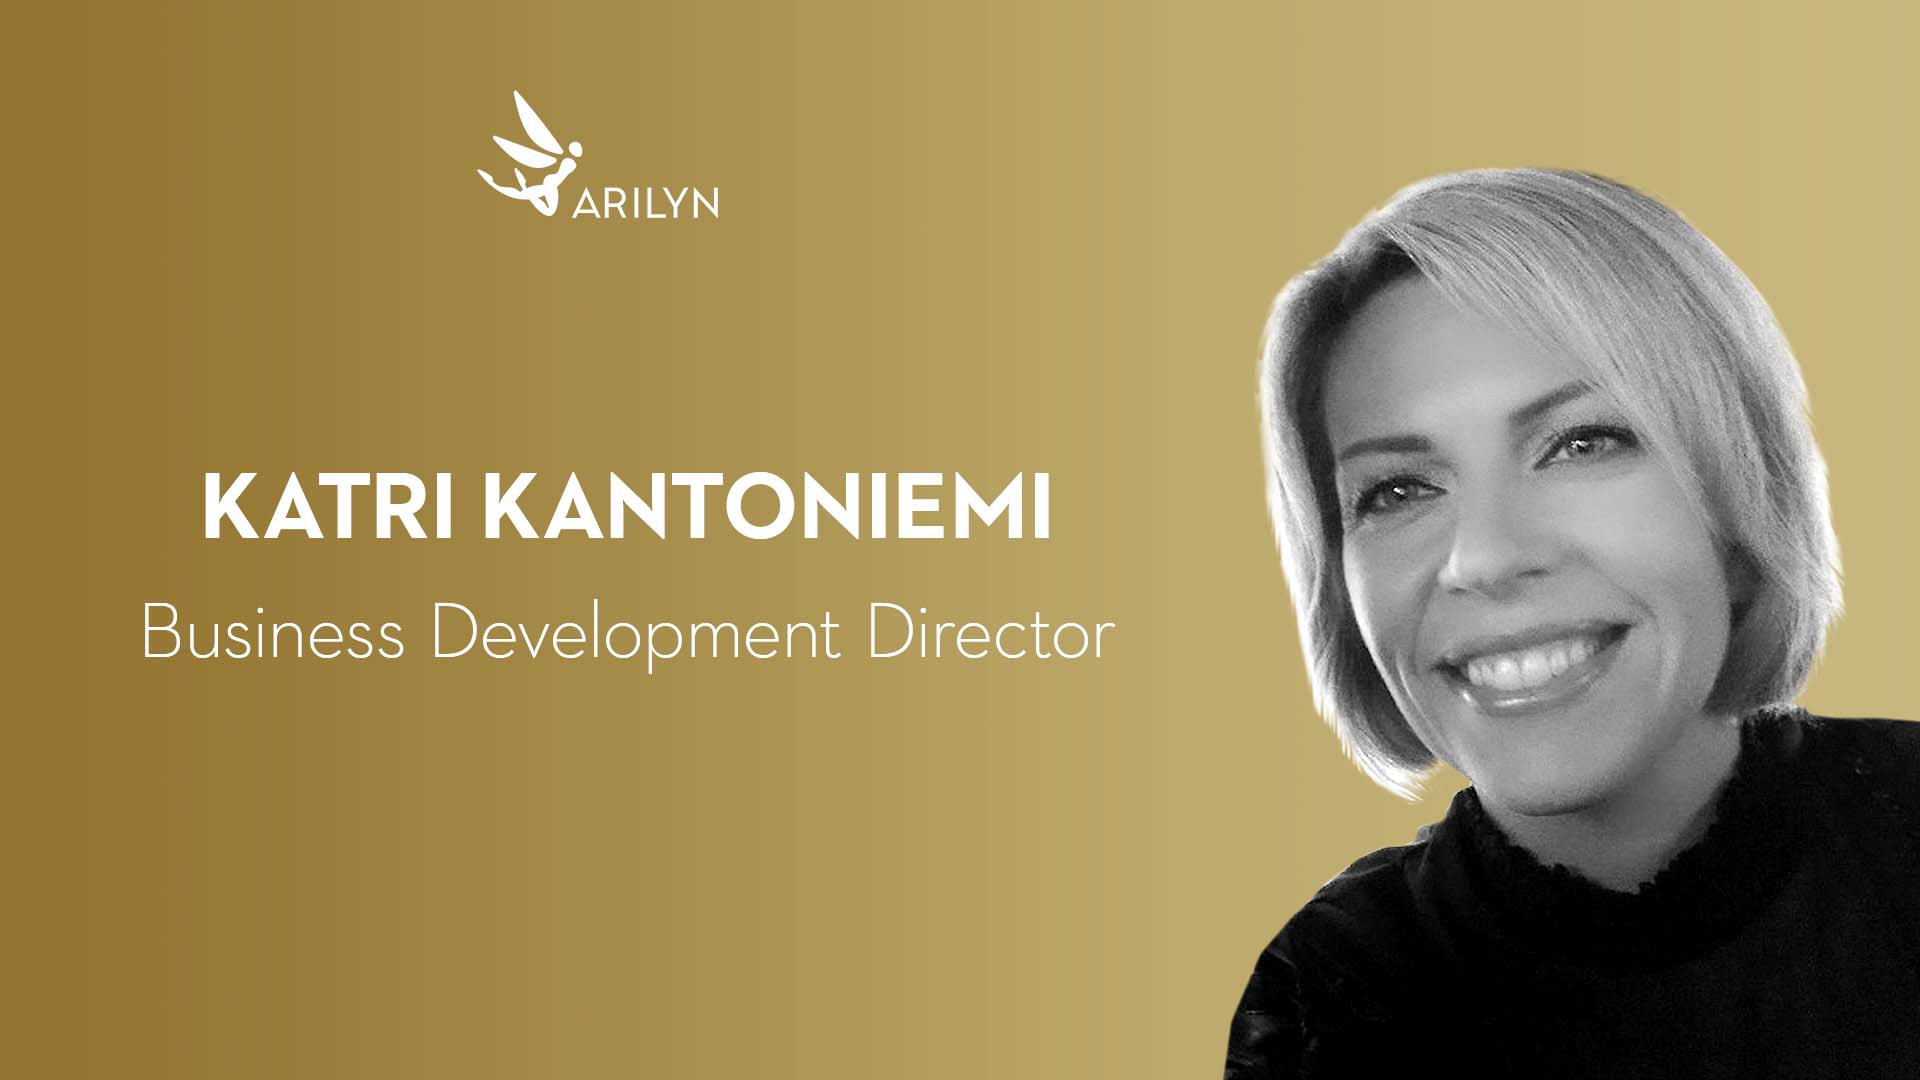 Get to know Arilyn – Katri, Business Development Director